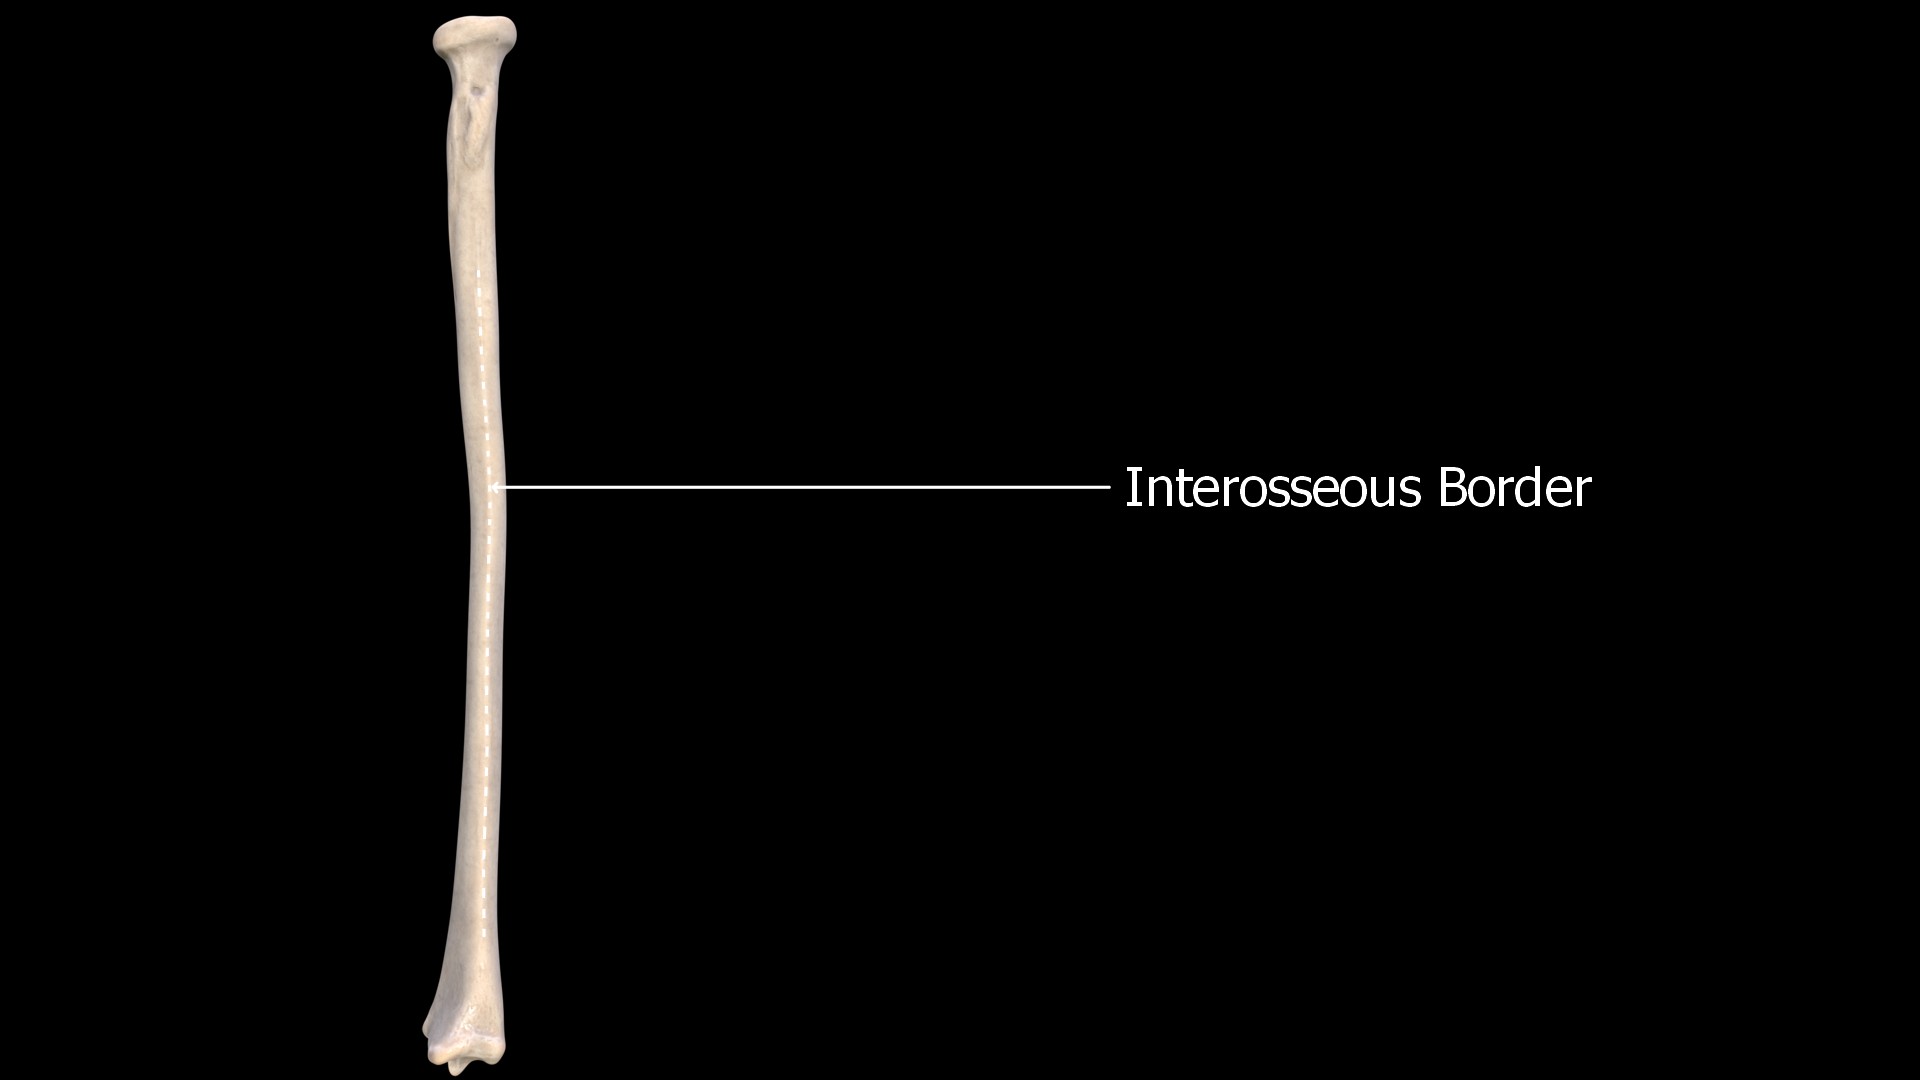 interosseous border is the sharp border on medial aspect, where interosseous membrane is attached